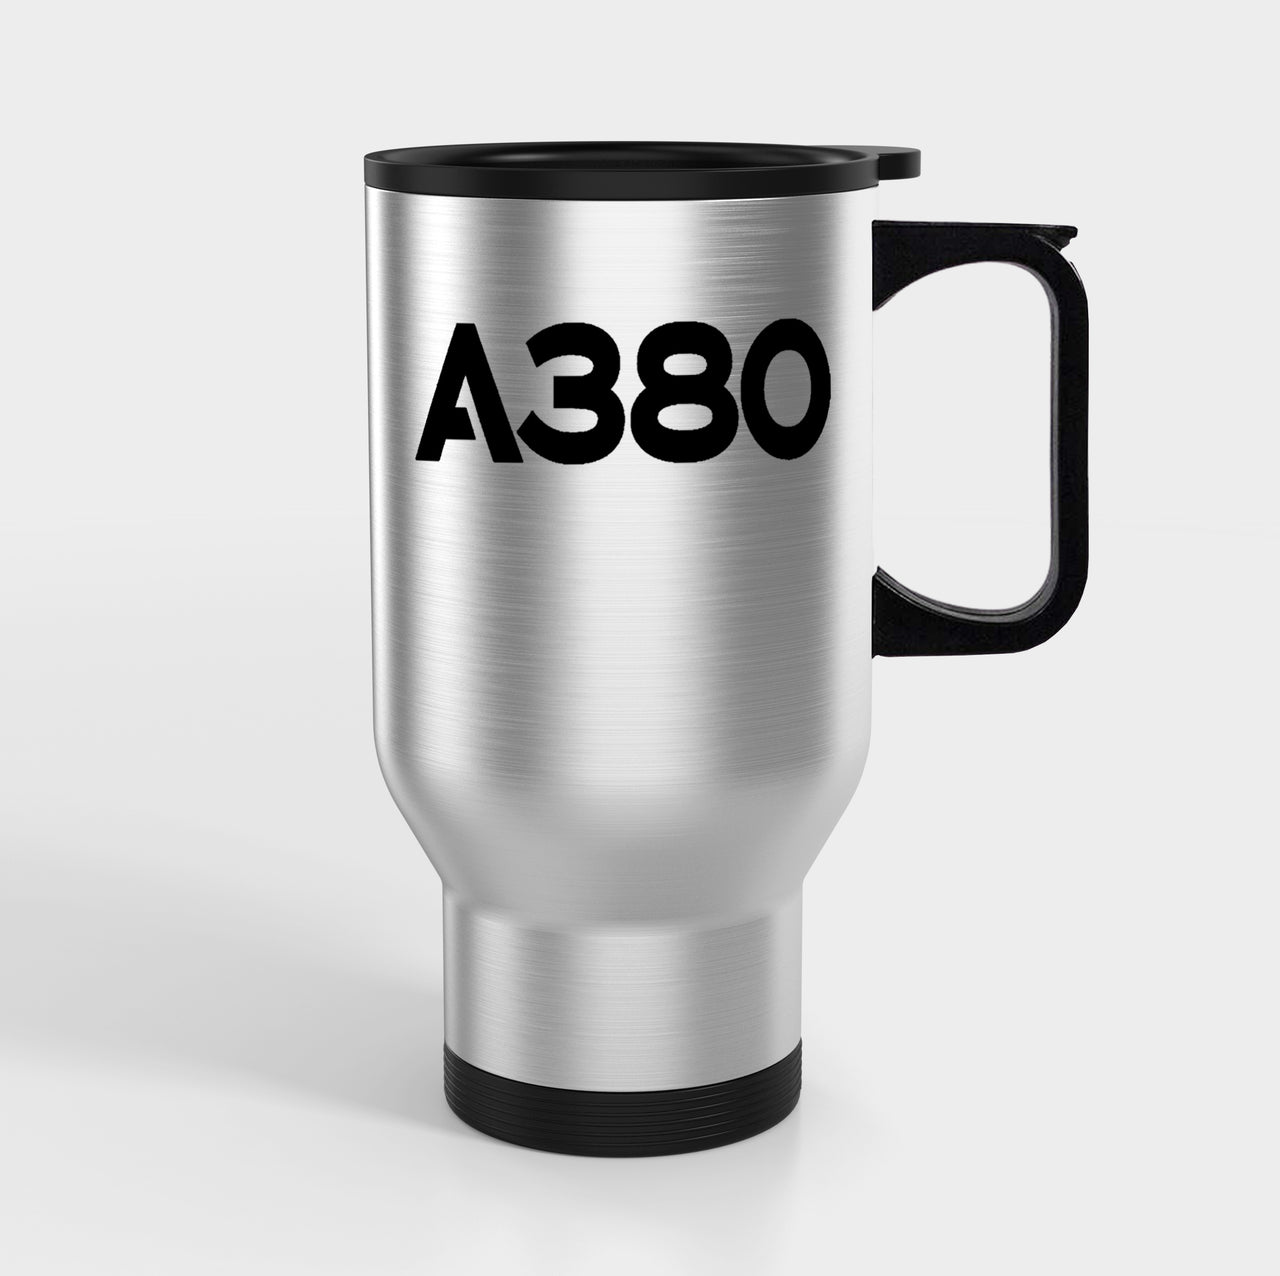 A380 Flat Text Designed Travel Mugs (With Holder)